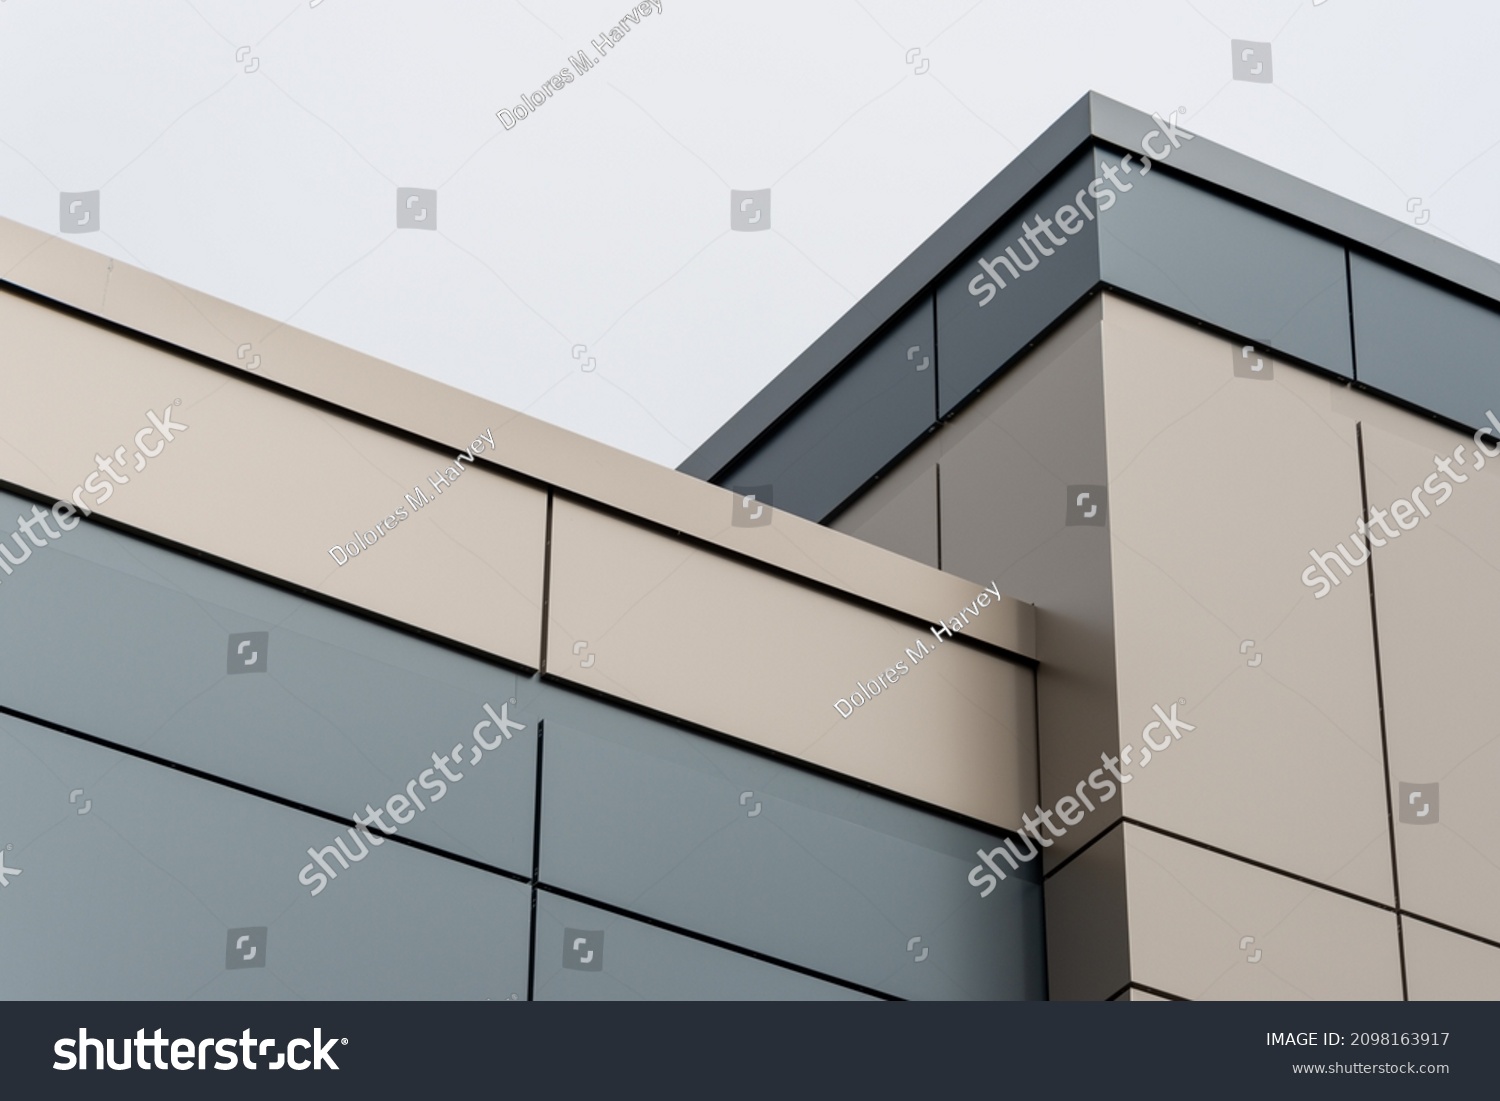 The exterior wall of a contemporary commercial style building with aluminum metal composite panels and glass windows. The futuristic building has engineered diagonal cladding steel frame panels. #2098163917